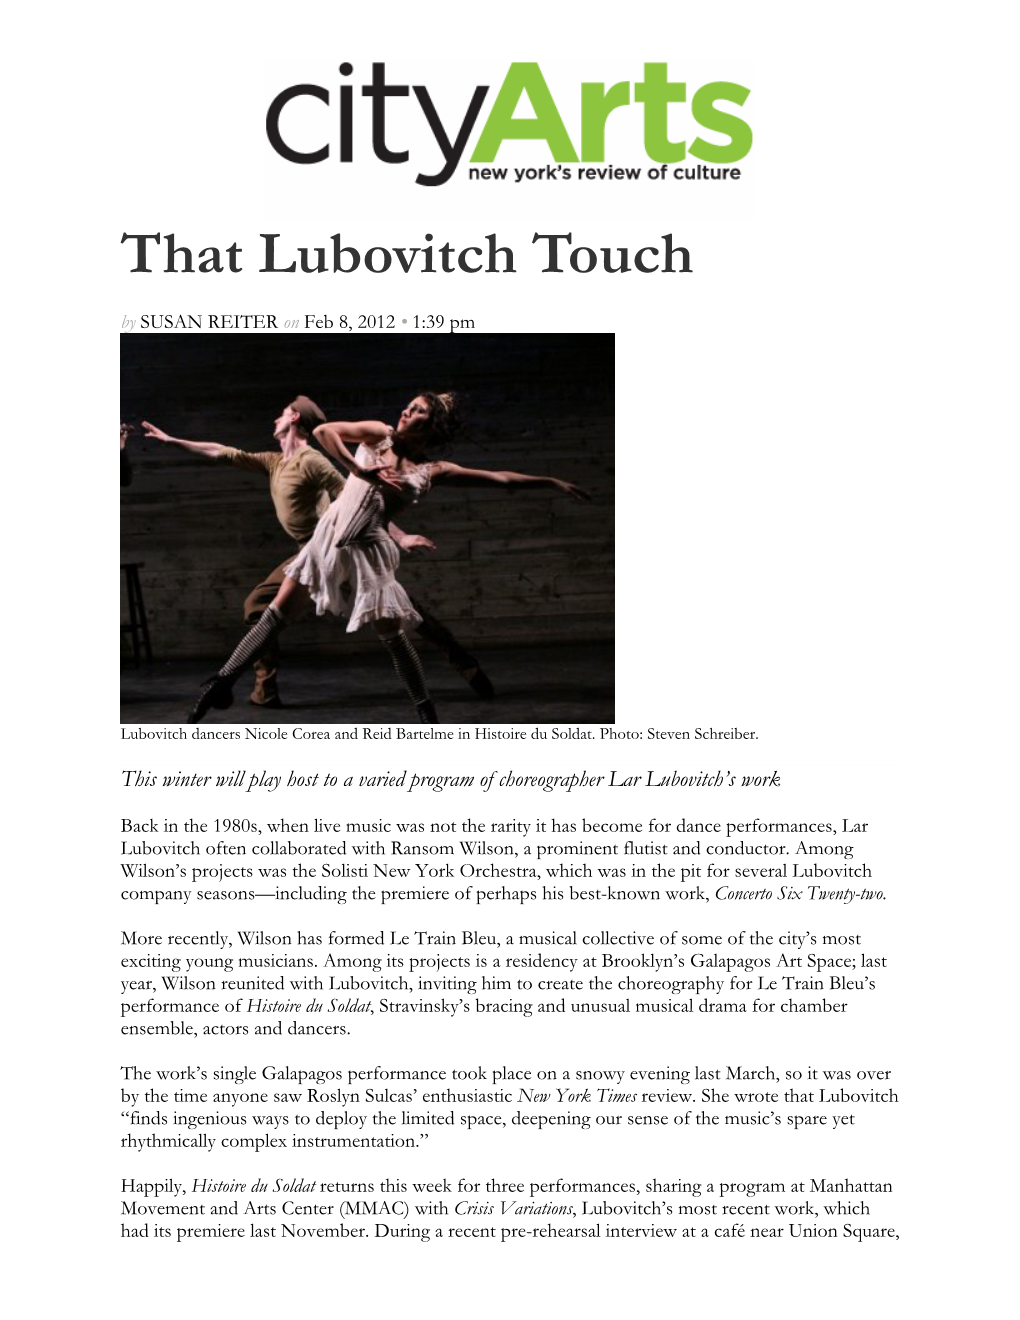 That Lubovitch Touch by SUSAN REITER on Feb 8, 2012 • 1:39 Pm